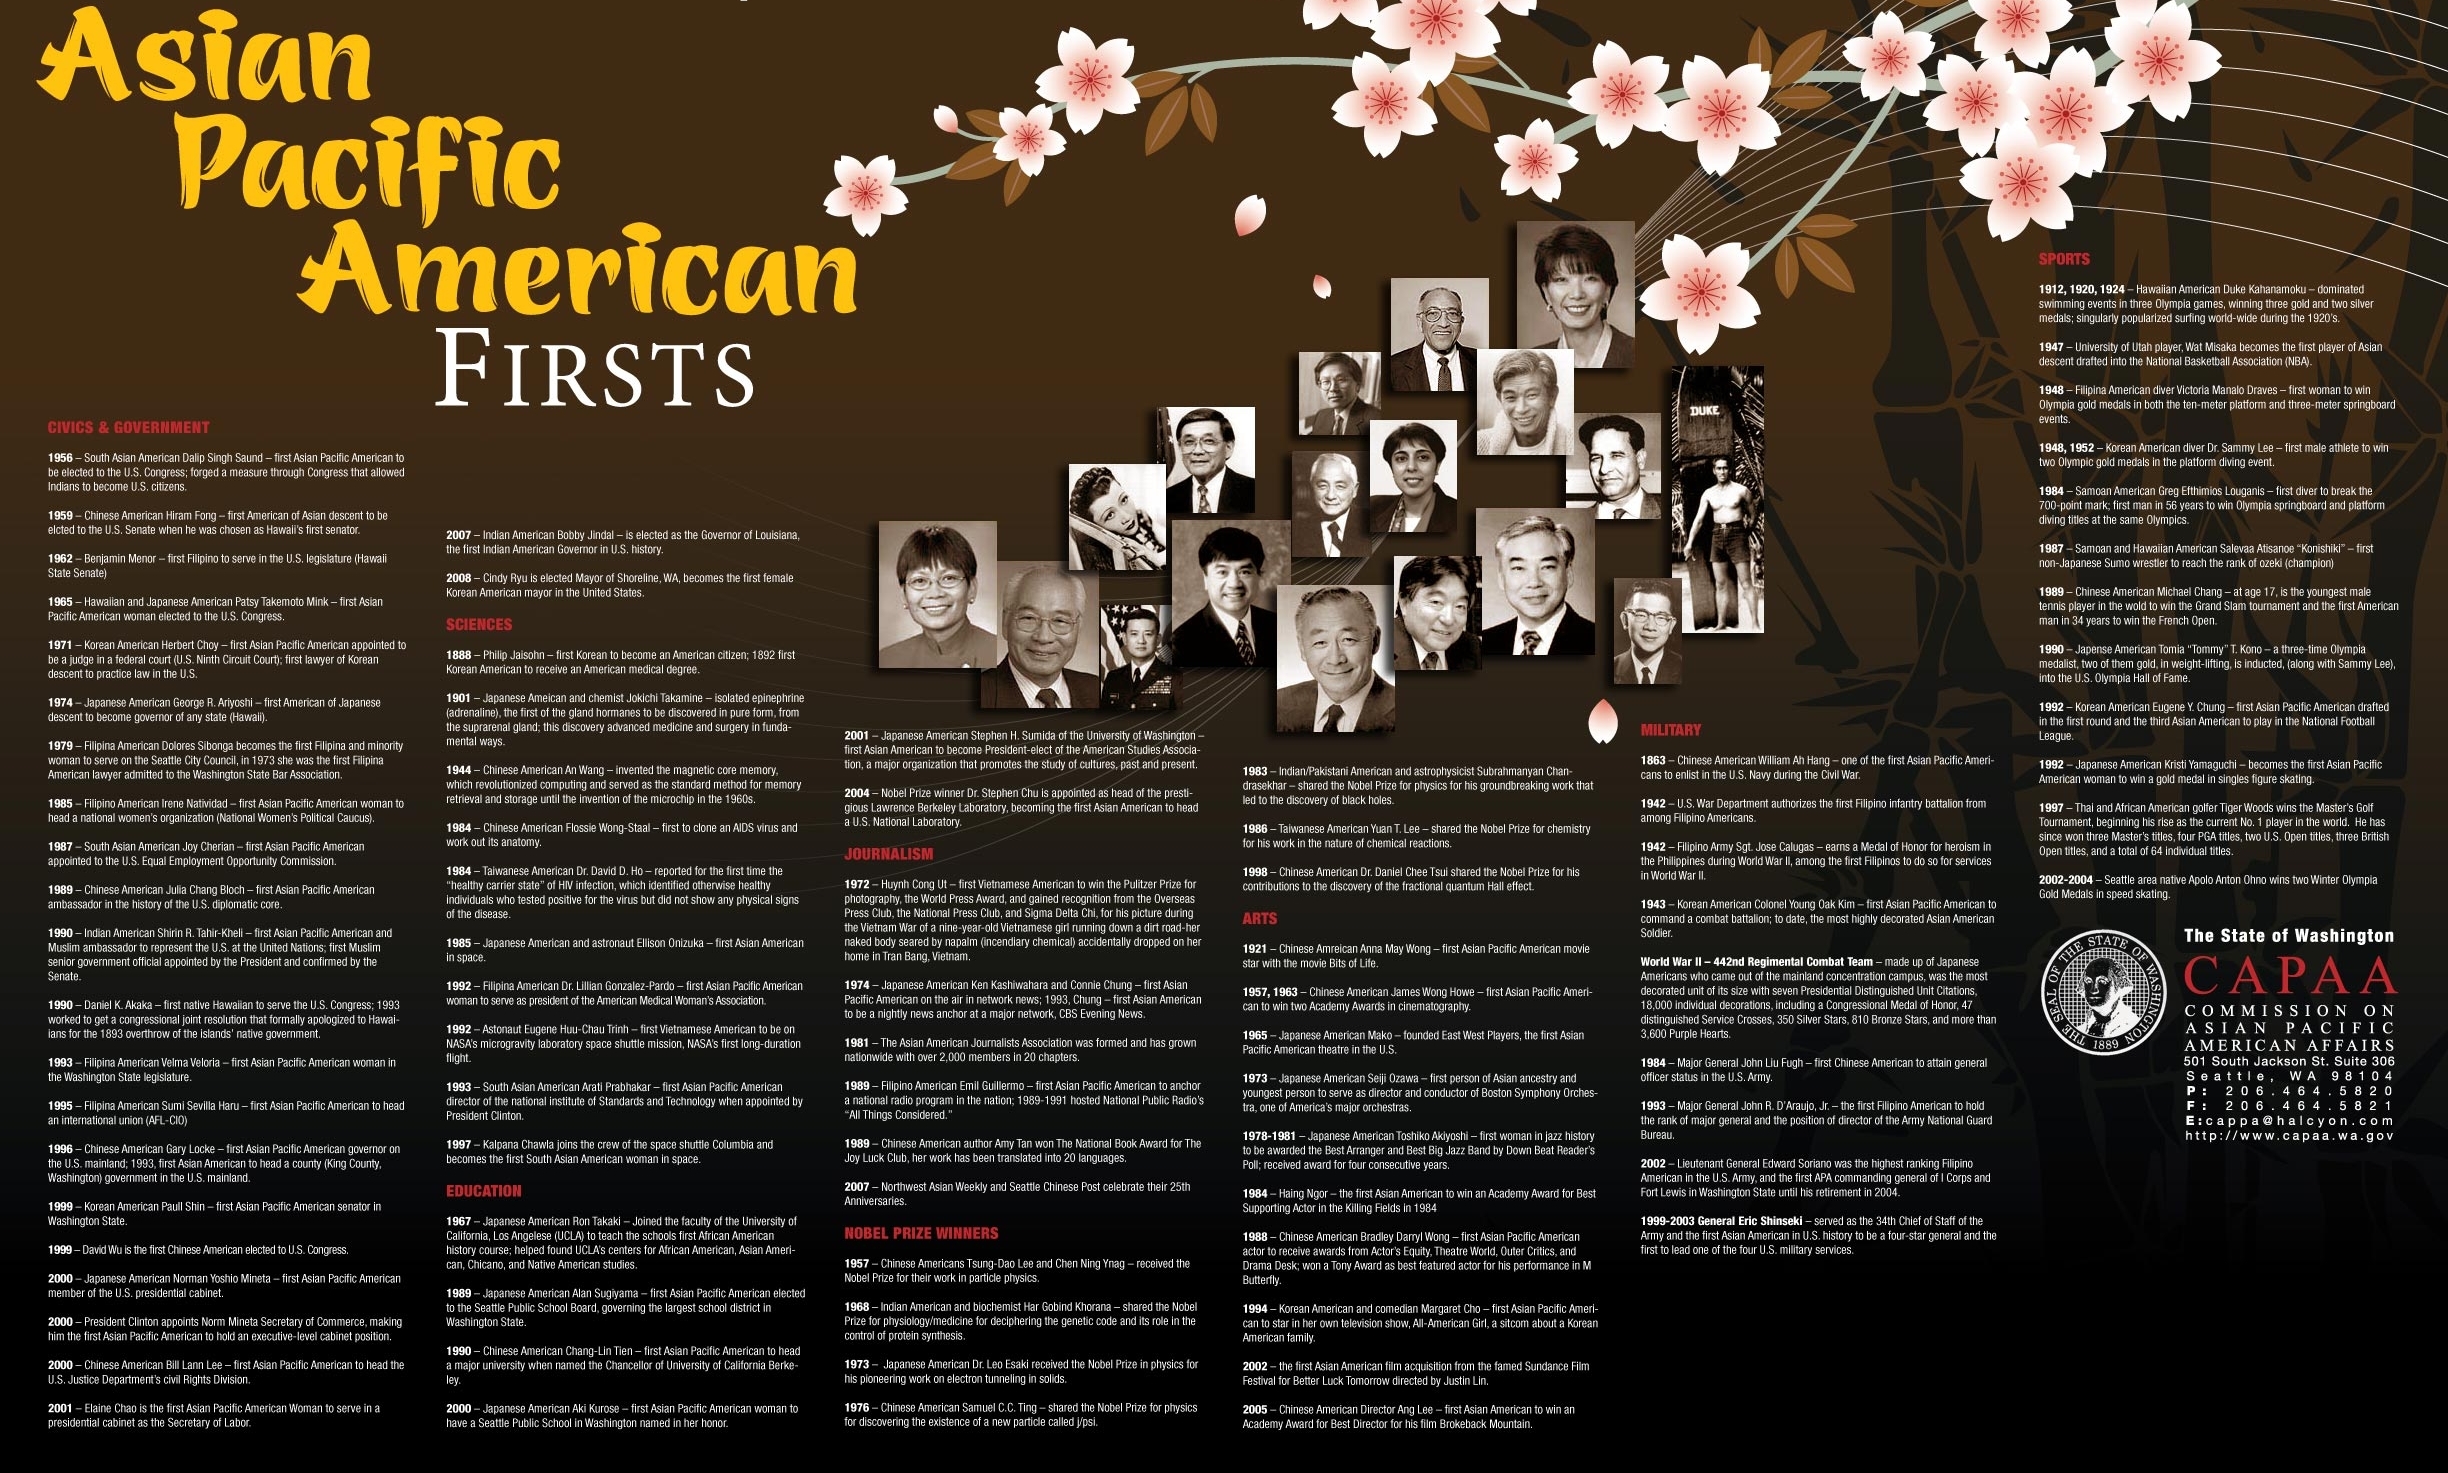 Asian Pacific American Heritage Month Information